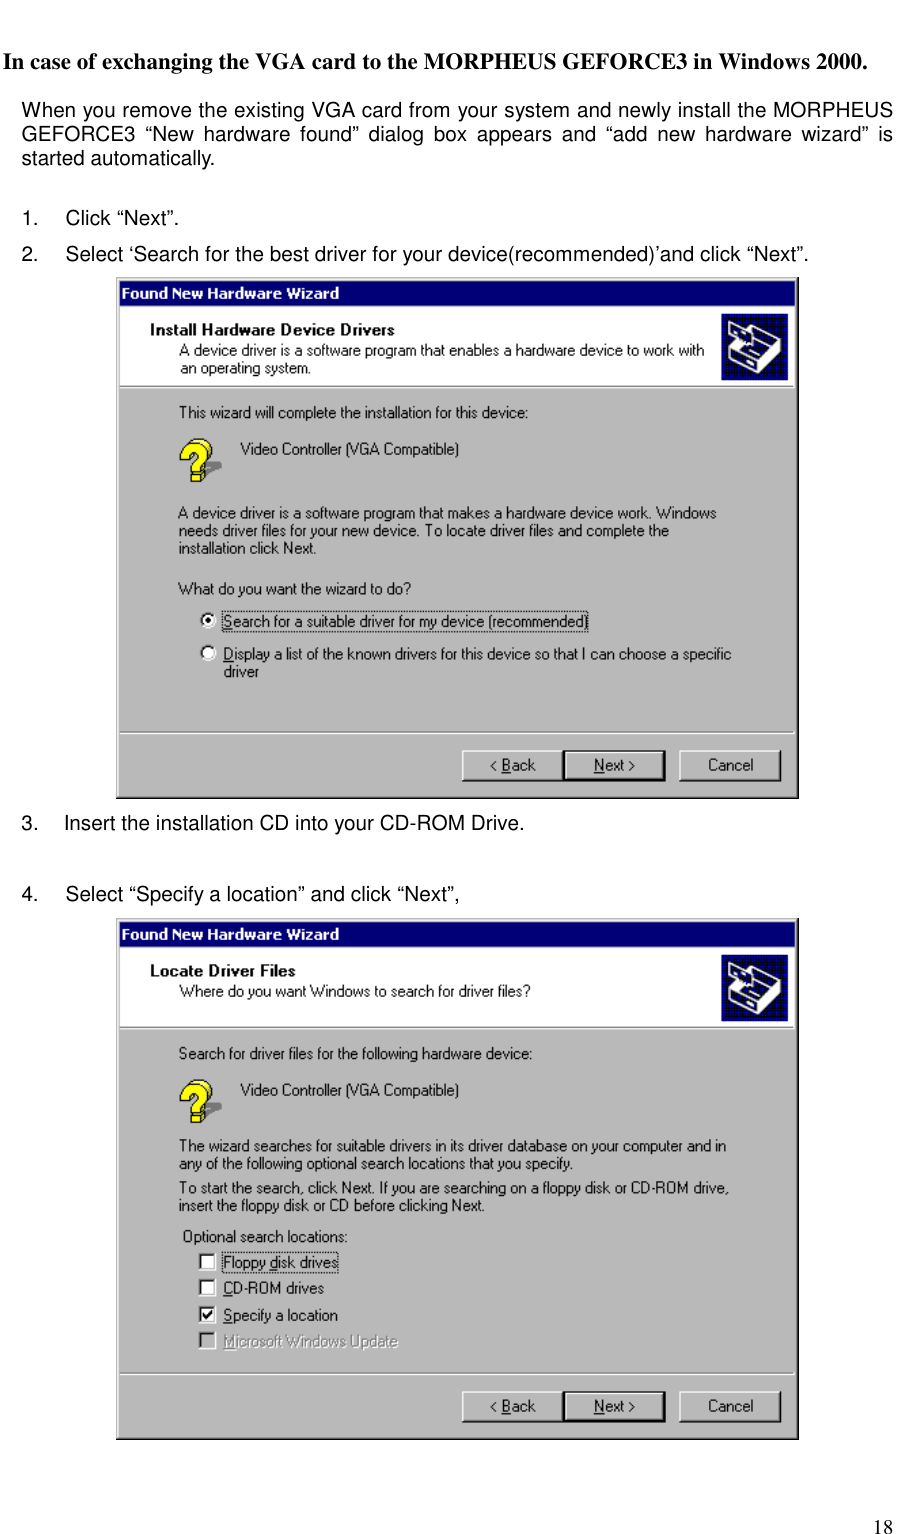     18 In case of exchanging the VGA card to the MORPHEUS GEFORCE3 in Windows 2000.      When you remove the existing VGA card from your system and newly install the MORPHEUS GEFORCE3 “New hardware found” dialog box appears and “add new hardware wizard” is started automatically.  1.   Click “Next”. 2.     Select ‘Search for the best driver for your device(recommended)’and click “Next”.  3.   Insert the installation CD into your CD-ROM Drive.  4.     Select “Specify a location” and click “Next”,    